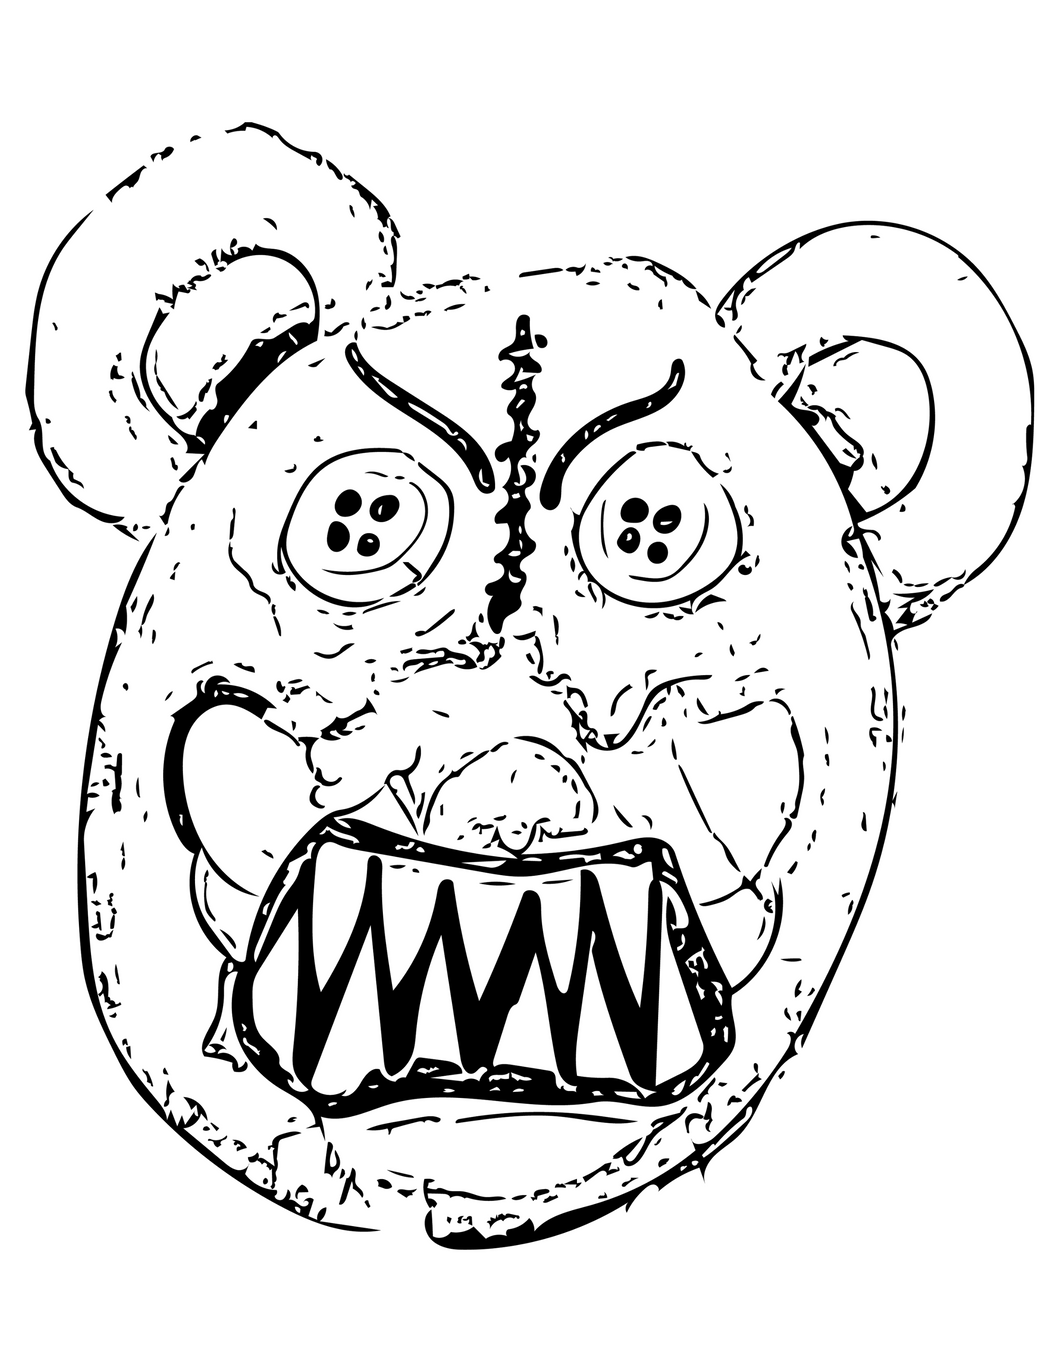 Scary Teddy Bear Face For Halloween Coloring Page – Dark Whimsical Art